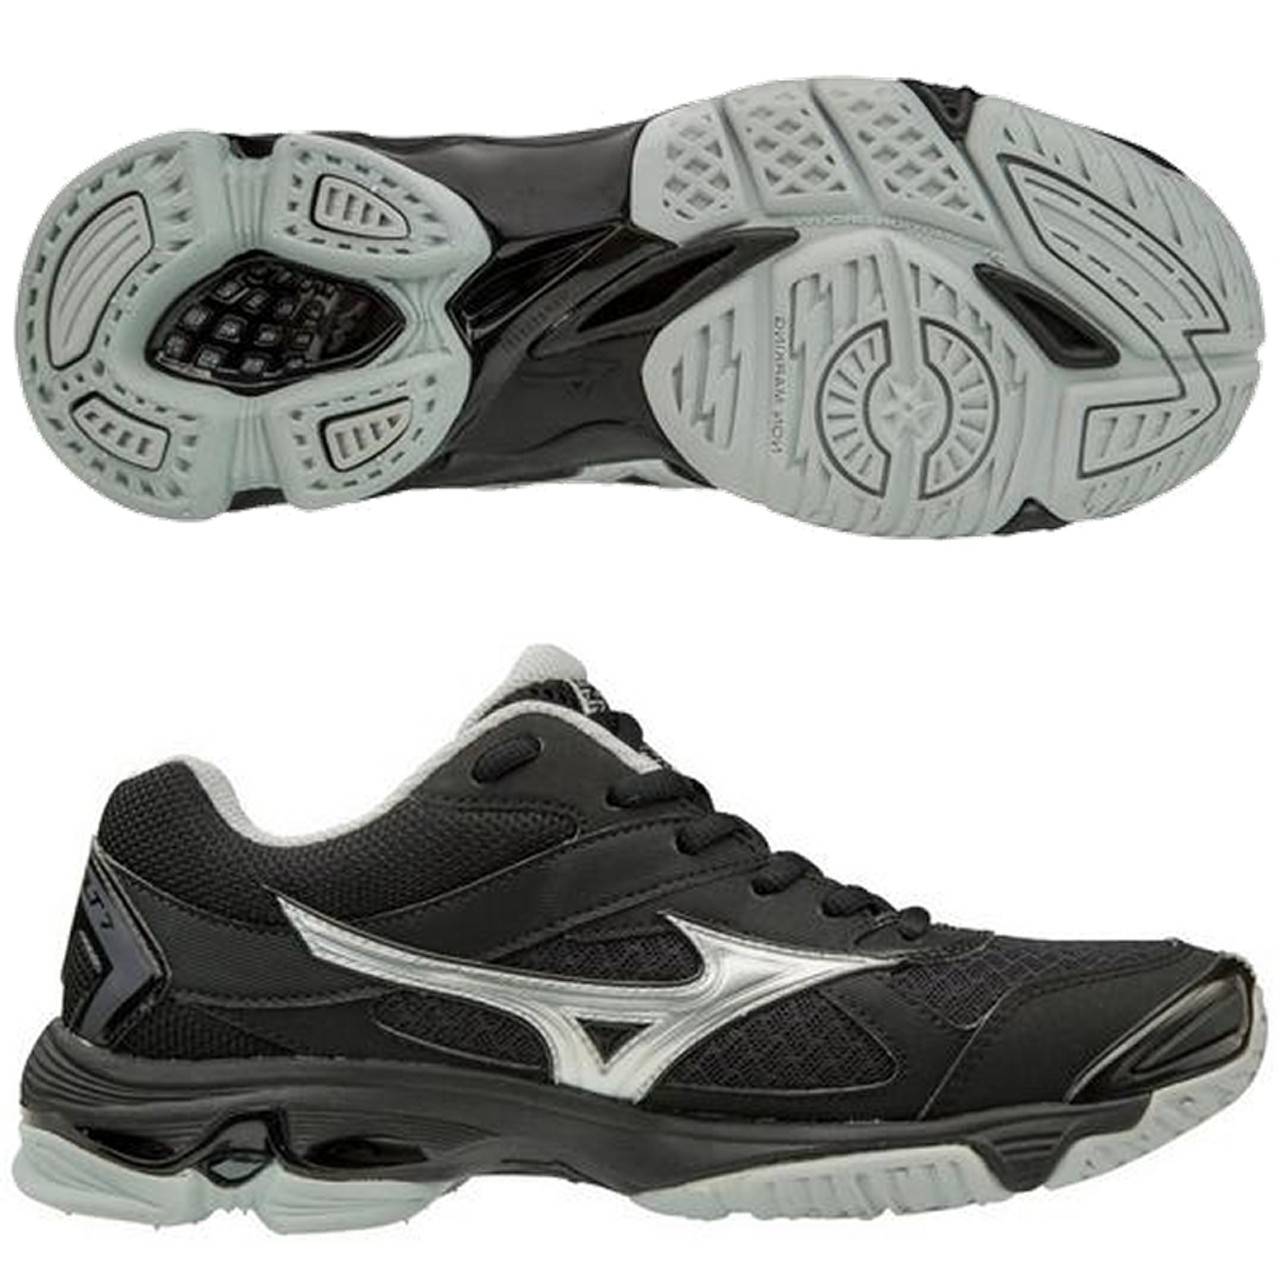 Best Tennis Shoes and Paddle Shoes for Men - Bell Racquet Sports